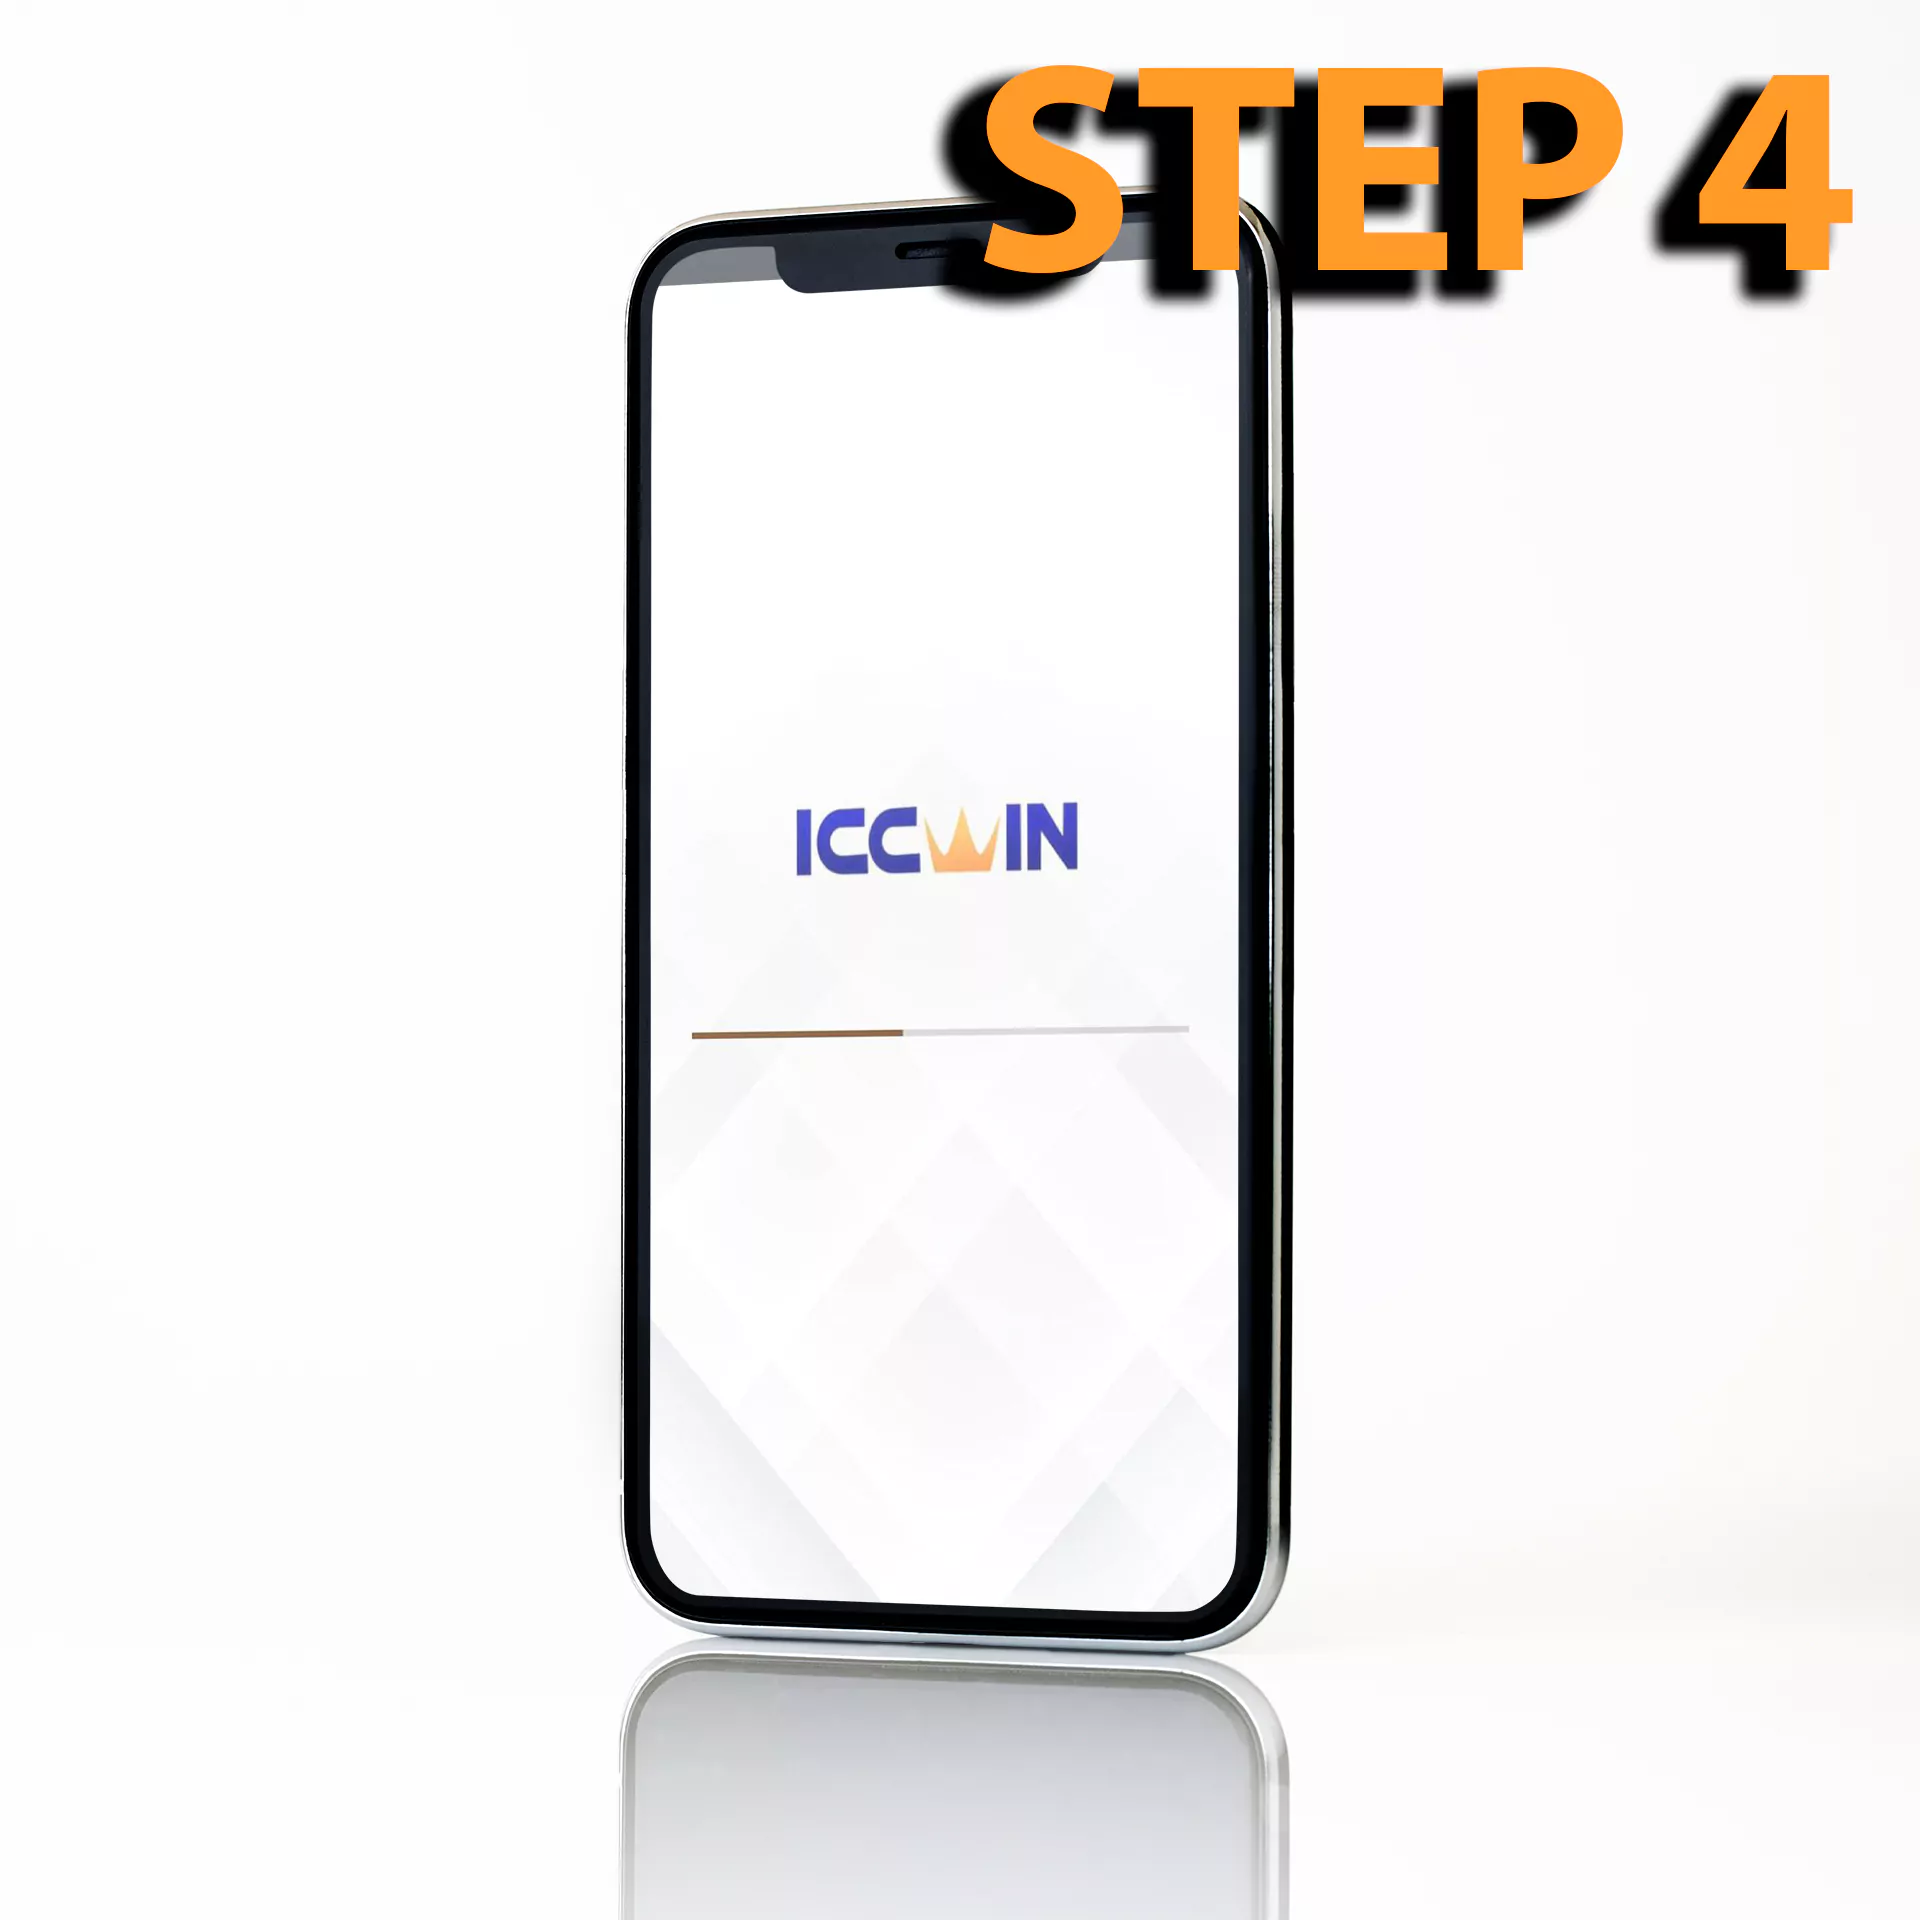 Confirm the installation and start your betting journey with ICCWin App.